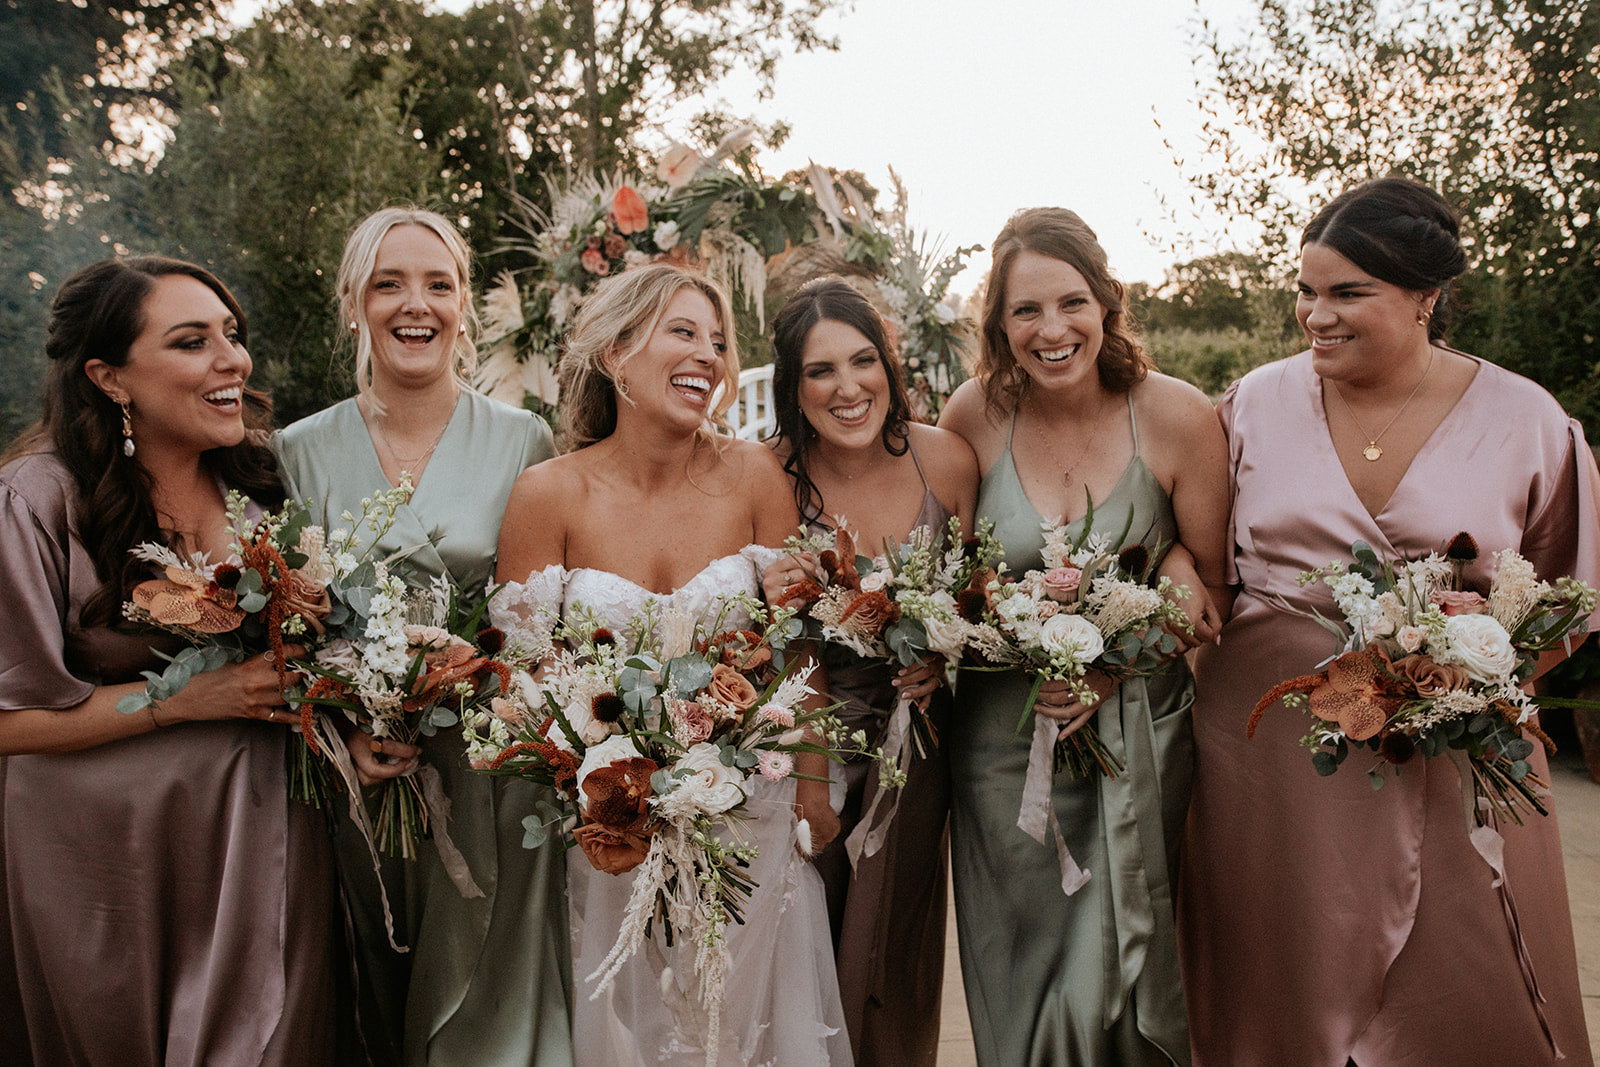 What colour goes with Sage green bridesmaids dresses? – Rewritten